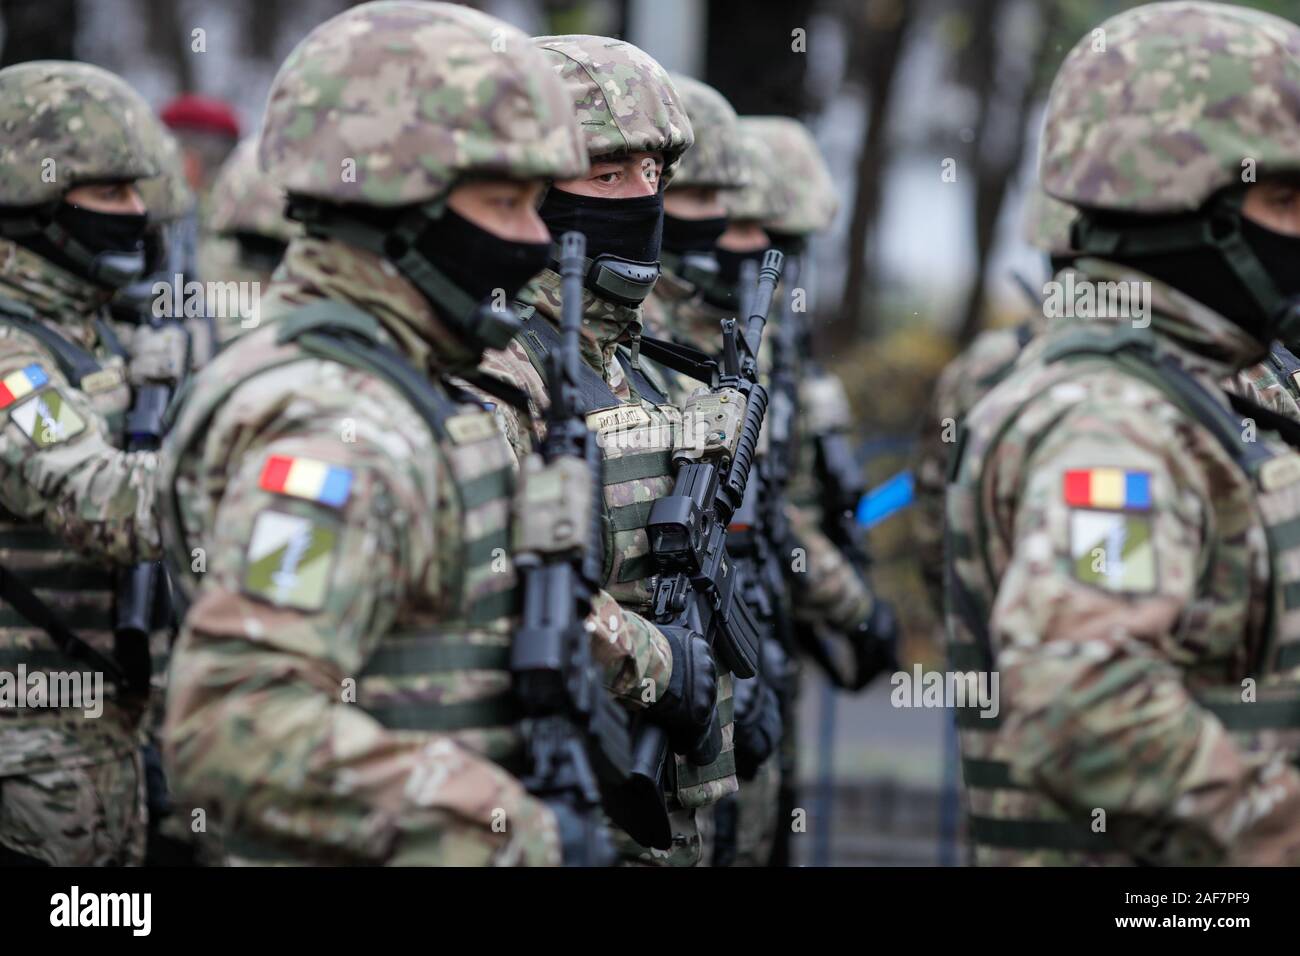 Bucharest, Romania - December 01, 2019: Romanian army soldiers at the Romanian National Day military parade. Stock Photo